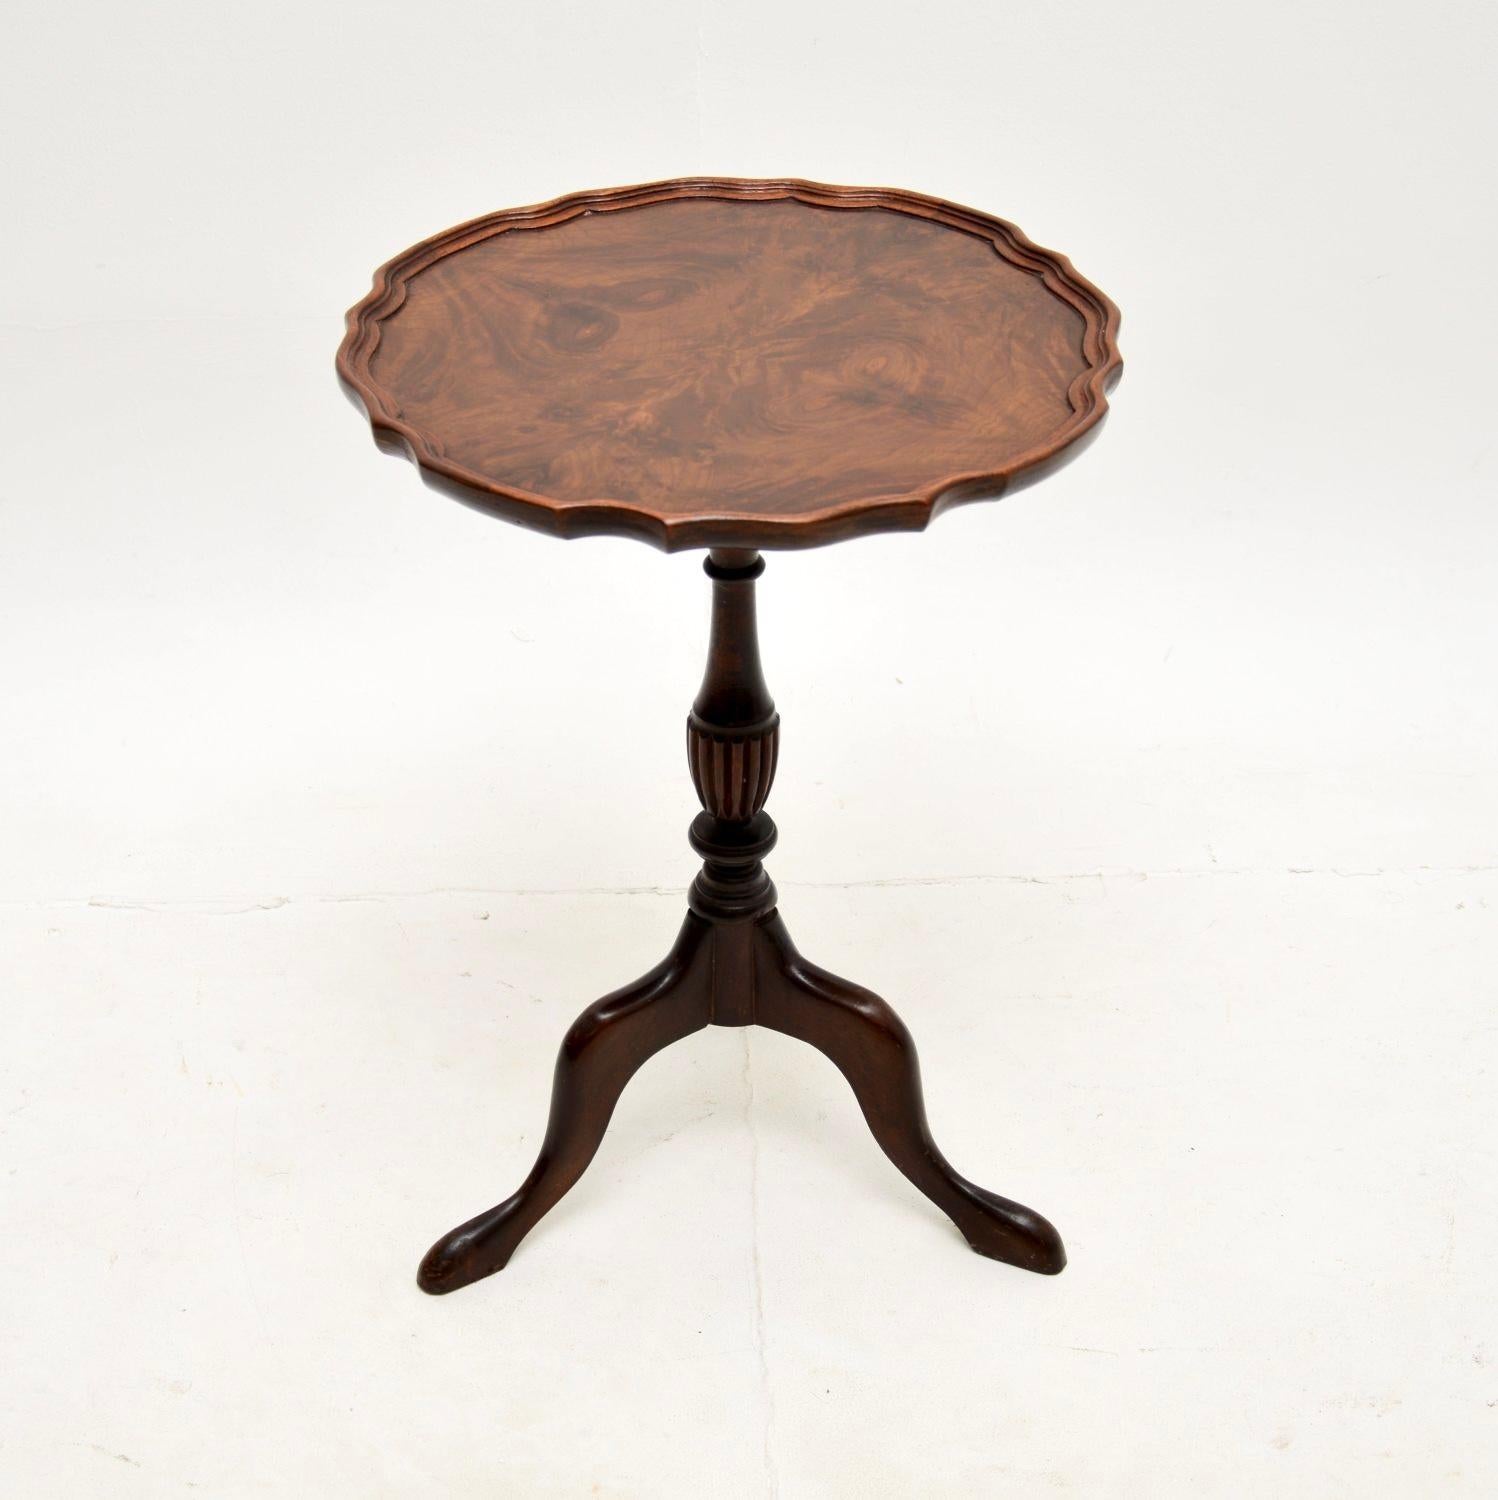 A beautiful and useful antique burr walnut wine table. This was made in England, it dates from around the 1930-50’s.

It is very well made and is a lovely size, perfect for use in various settings around the home. The top has a raised pie crust edge